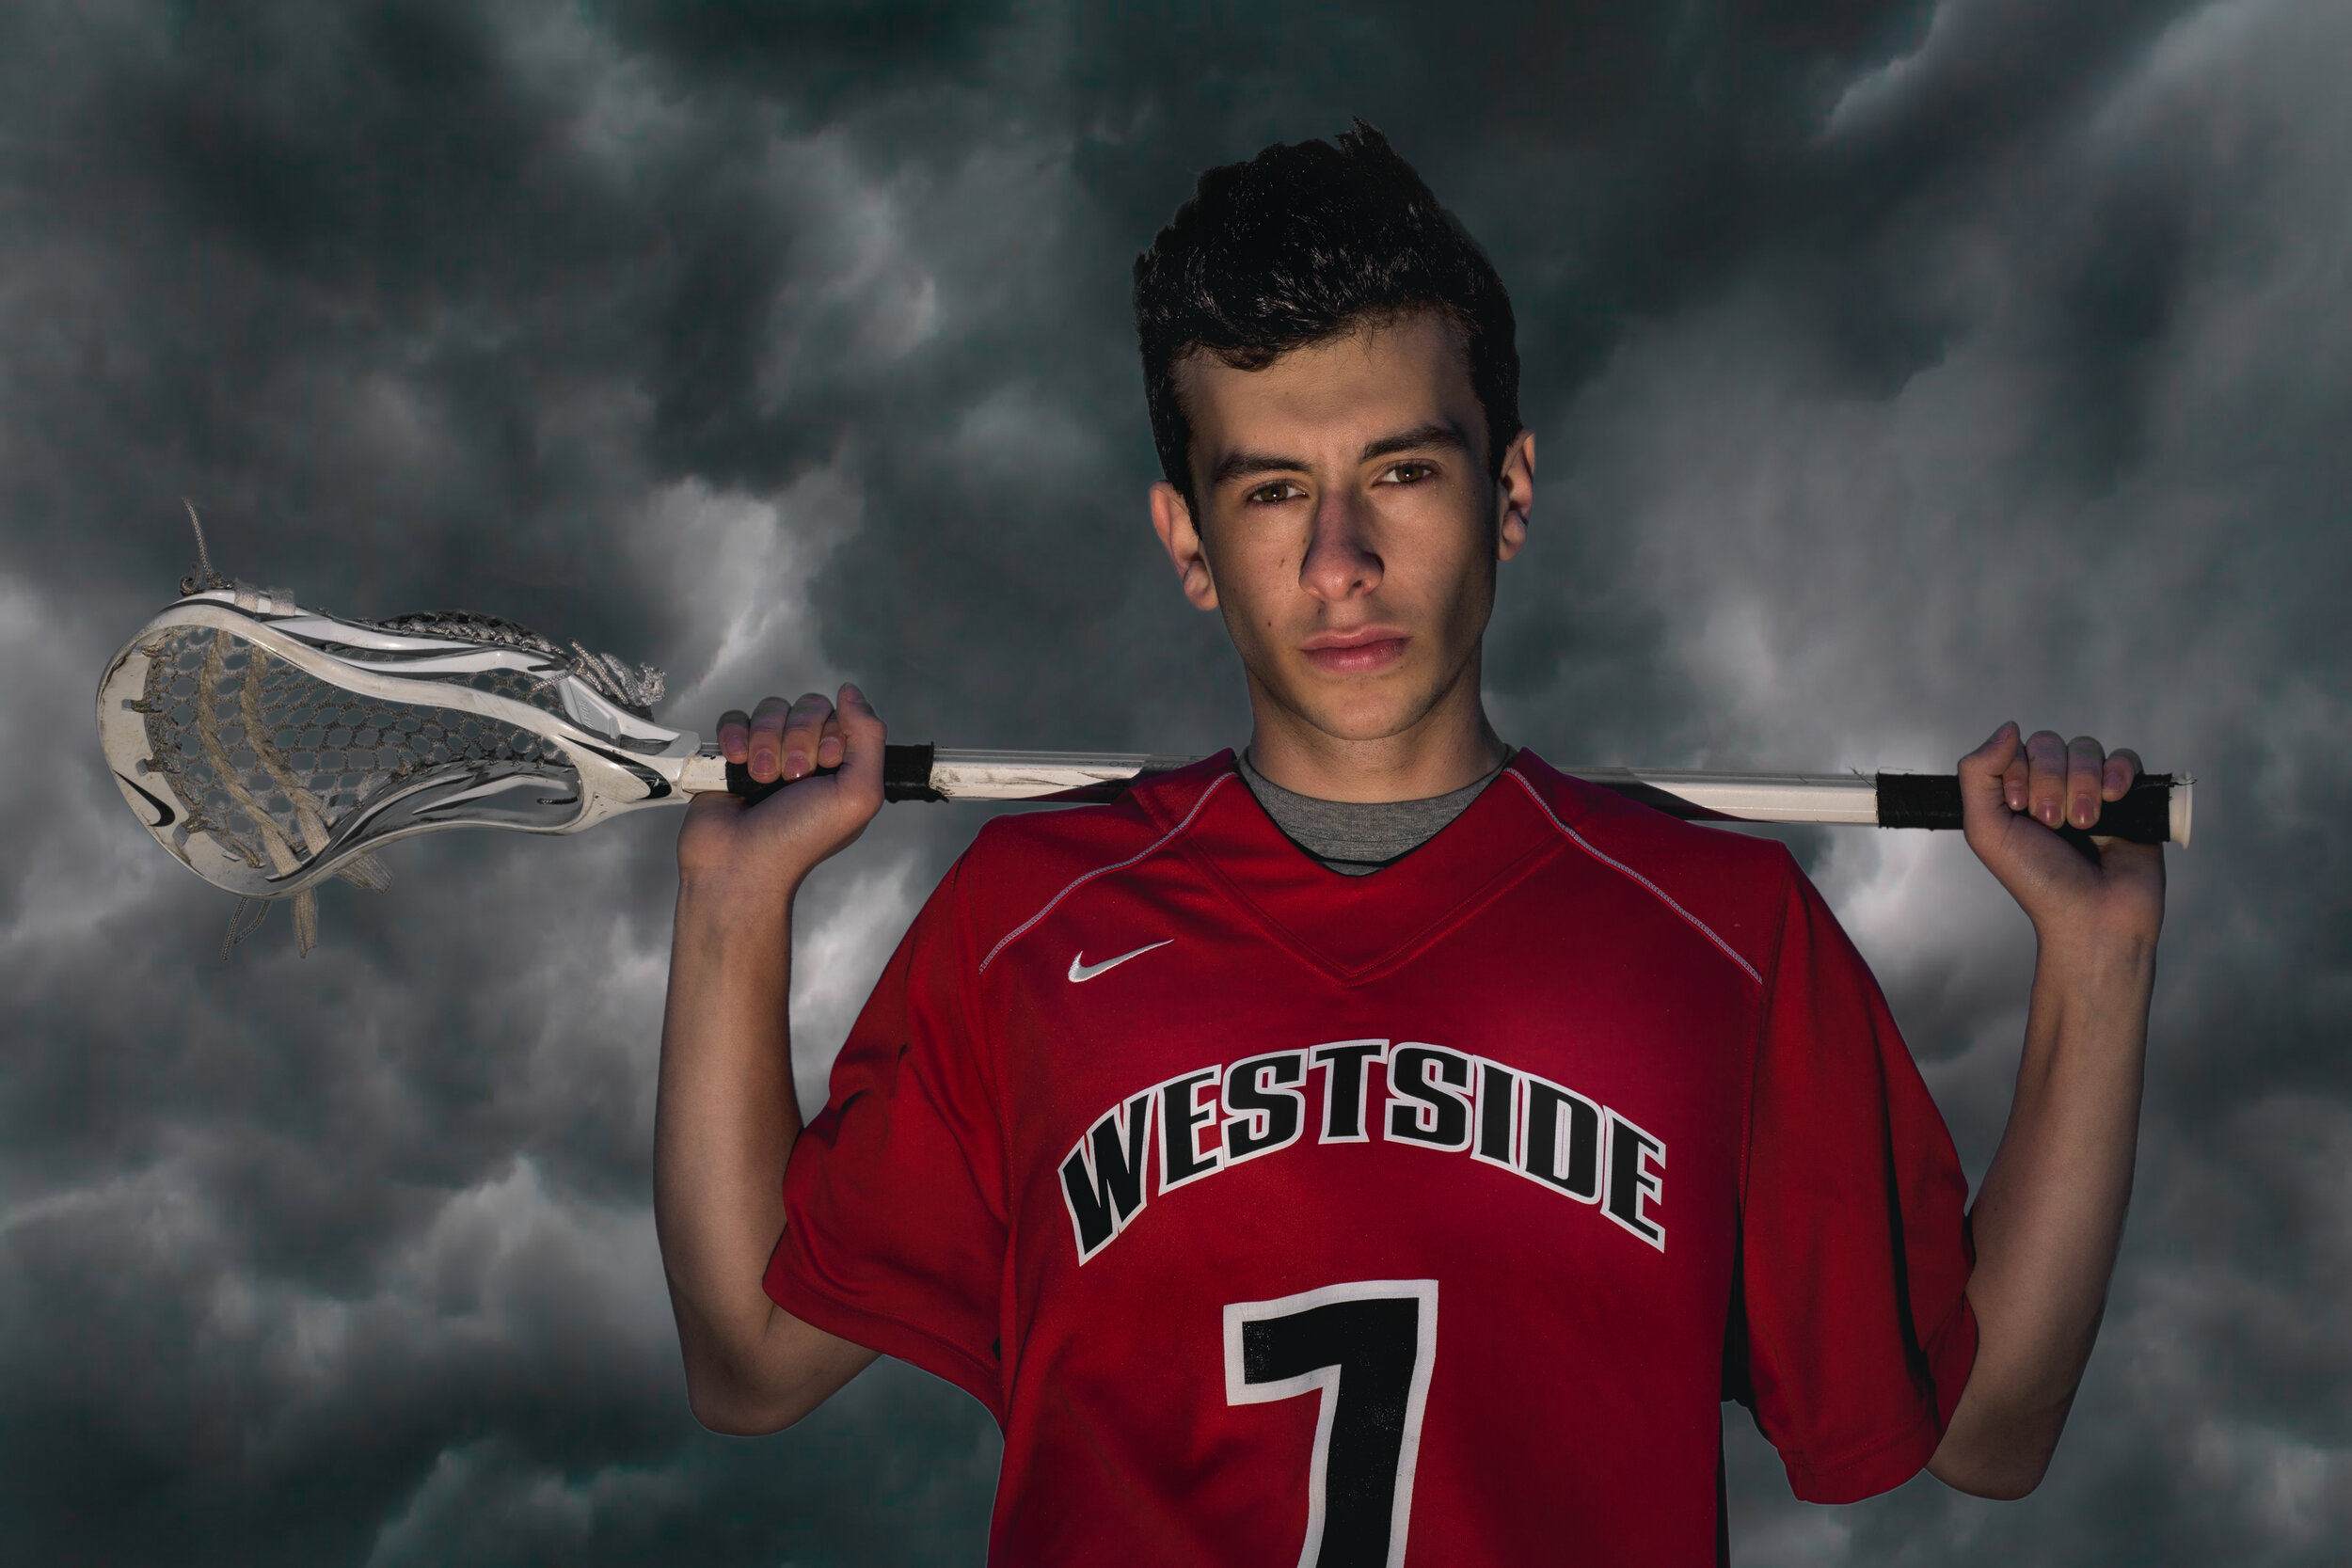 Westside highschool lacrosse player in front of thunderstorm clouds